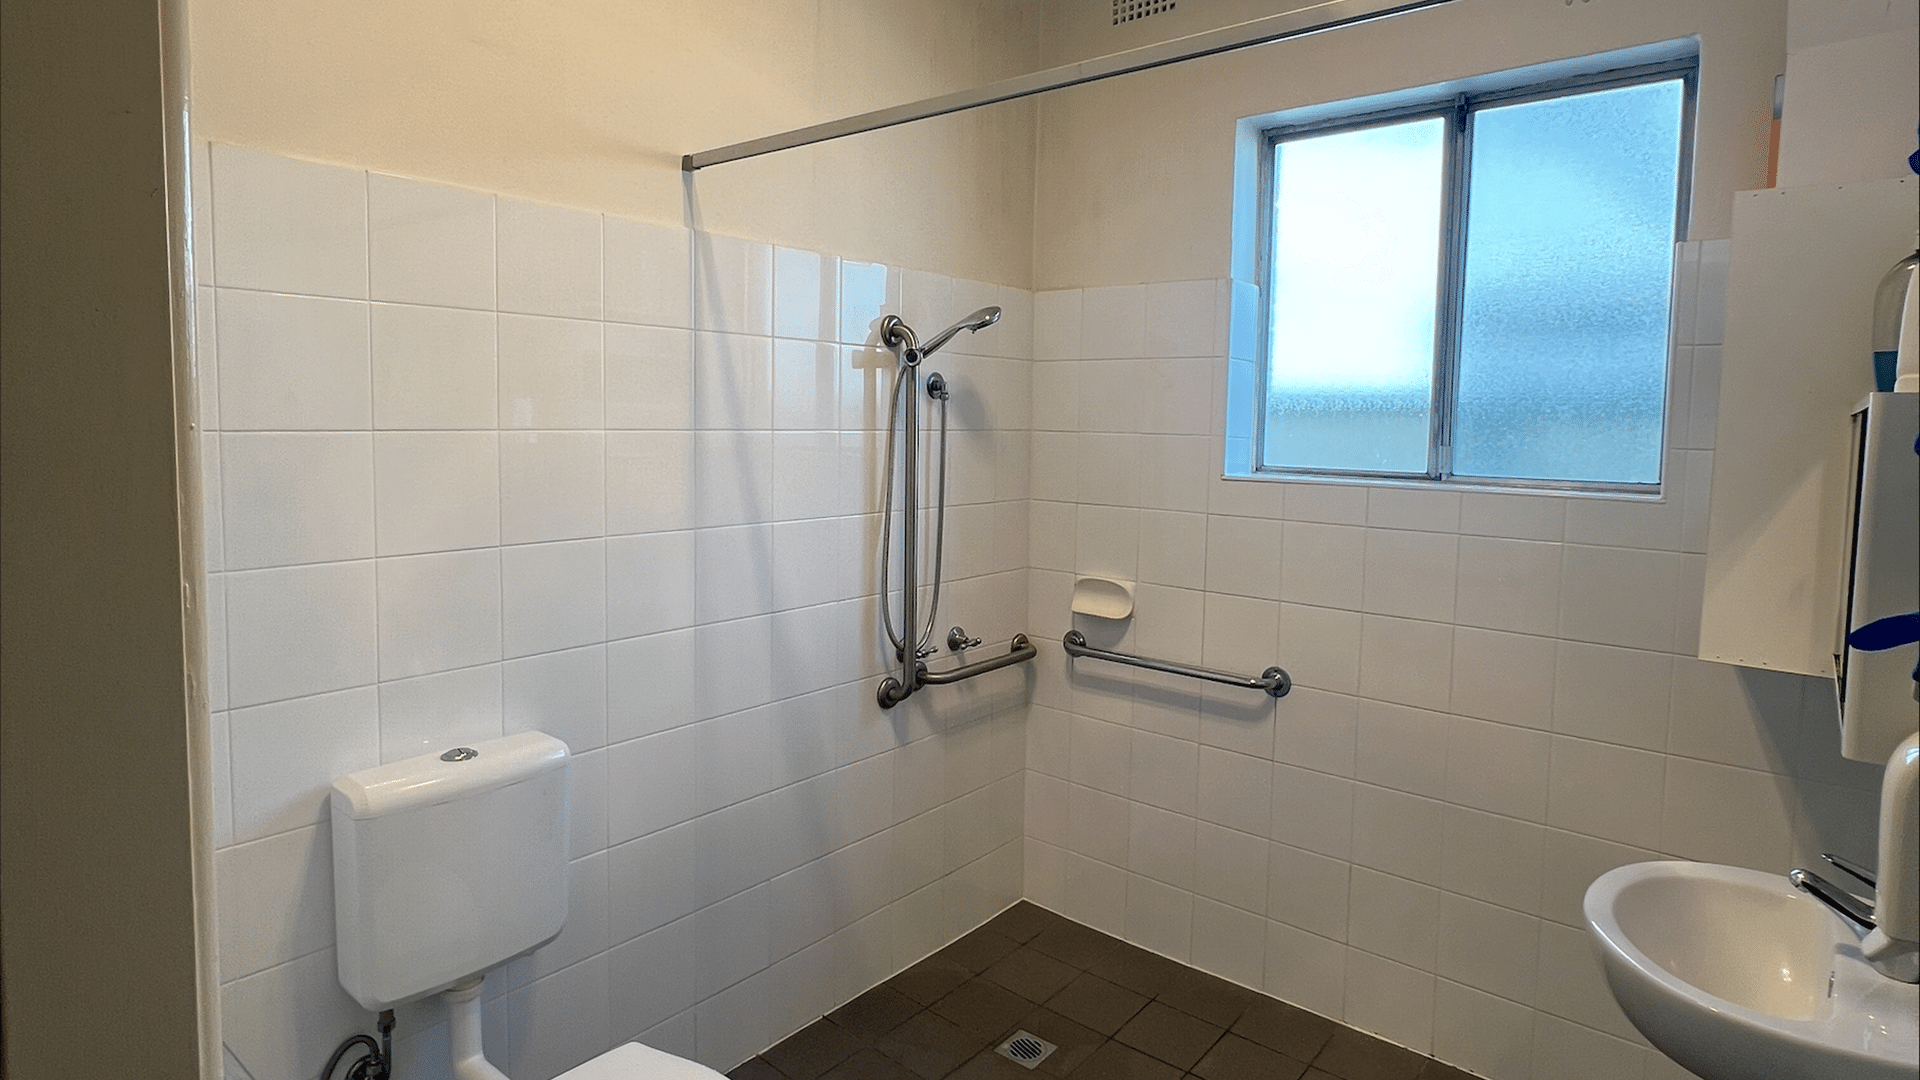 View of the bathroom showing a shower area next to a window, a toilet hand basin and storage cupboard.